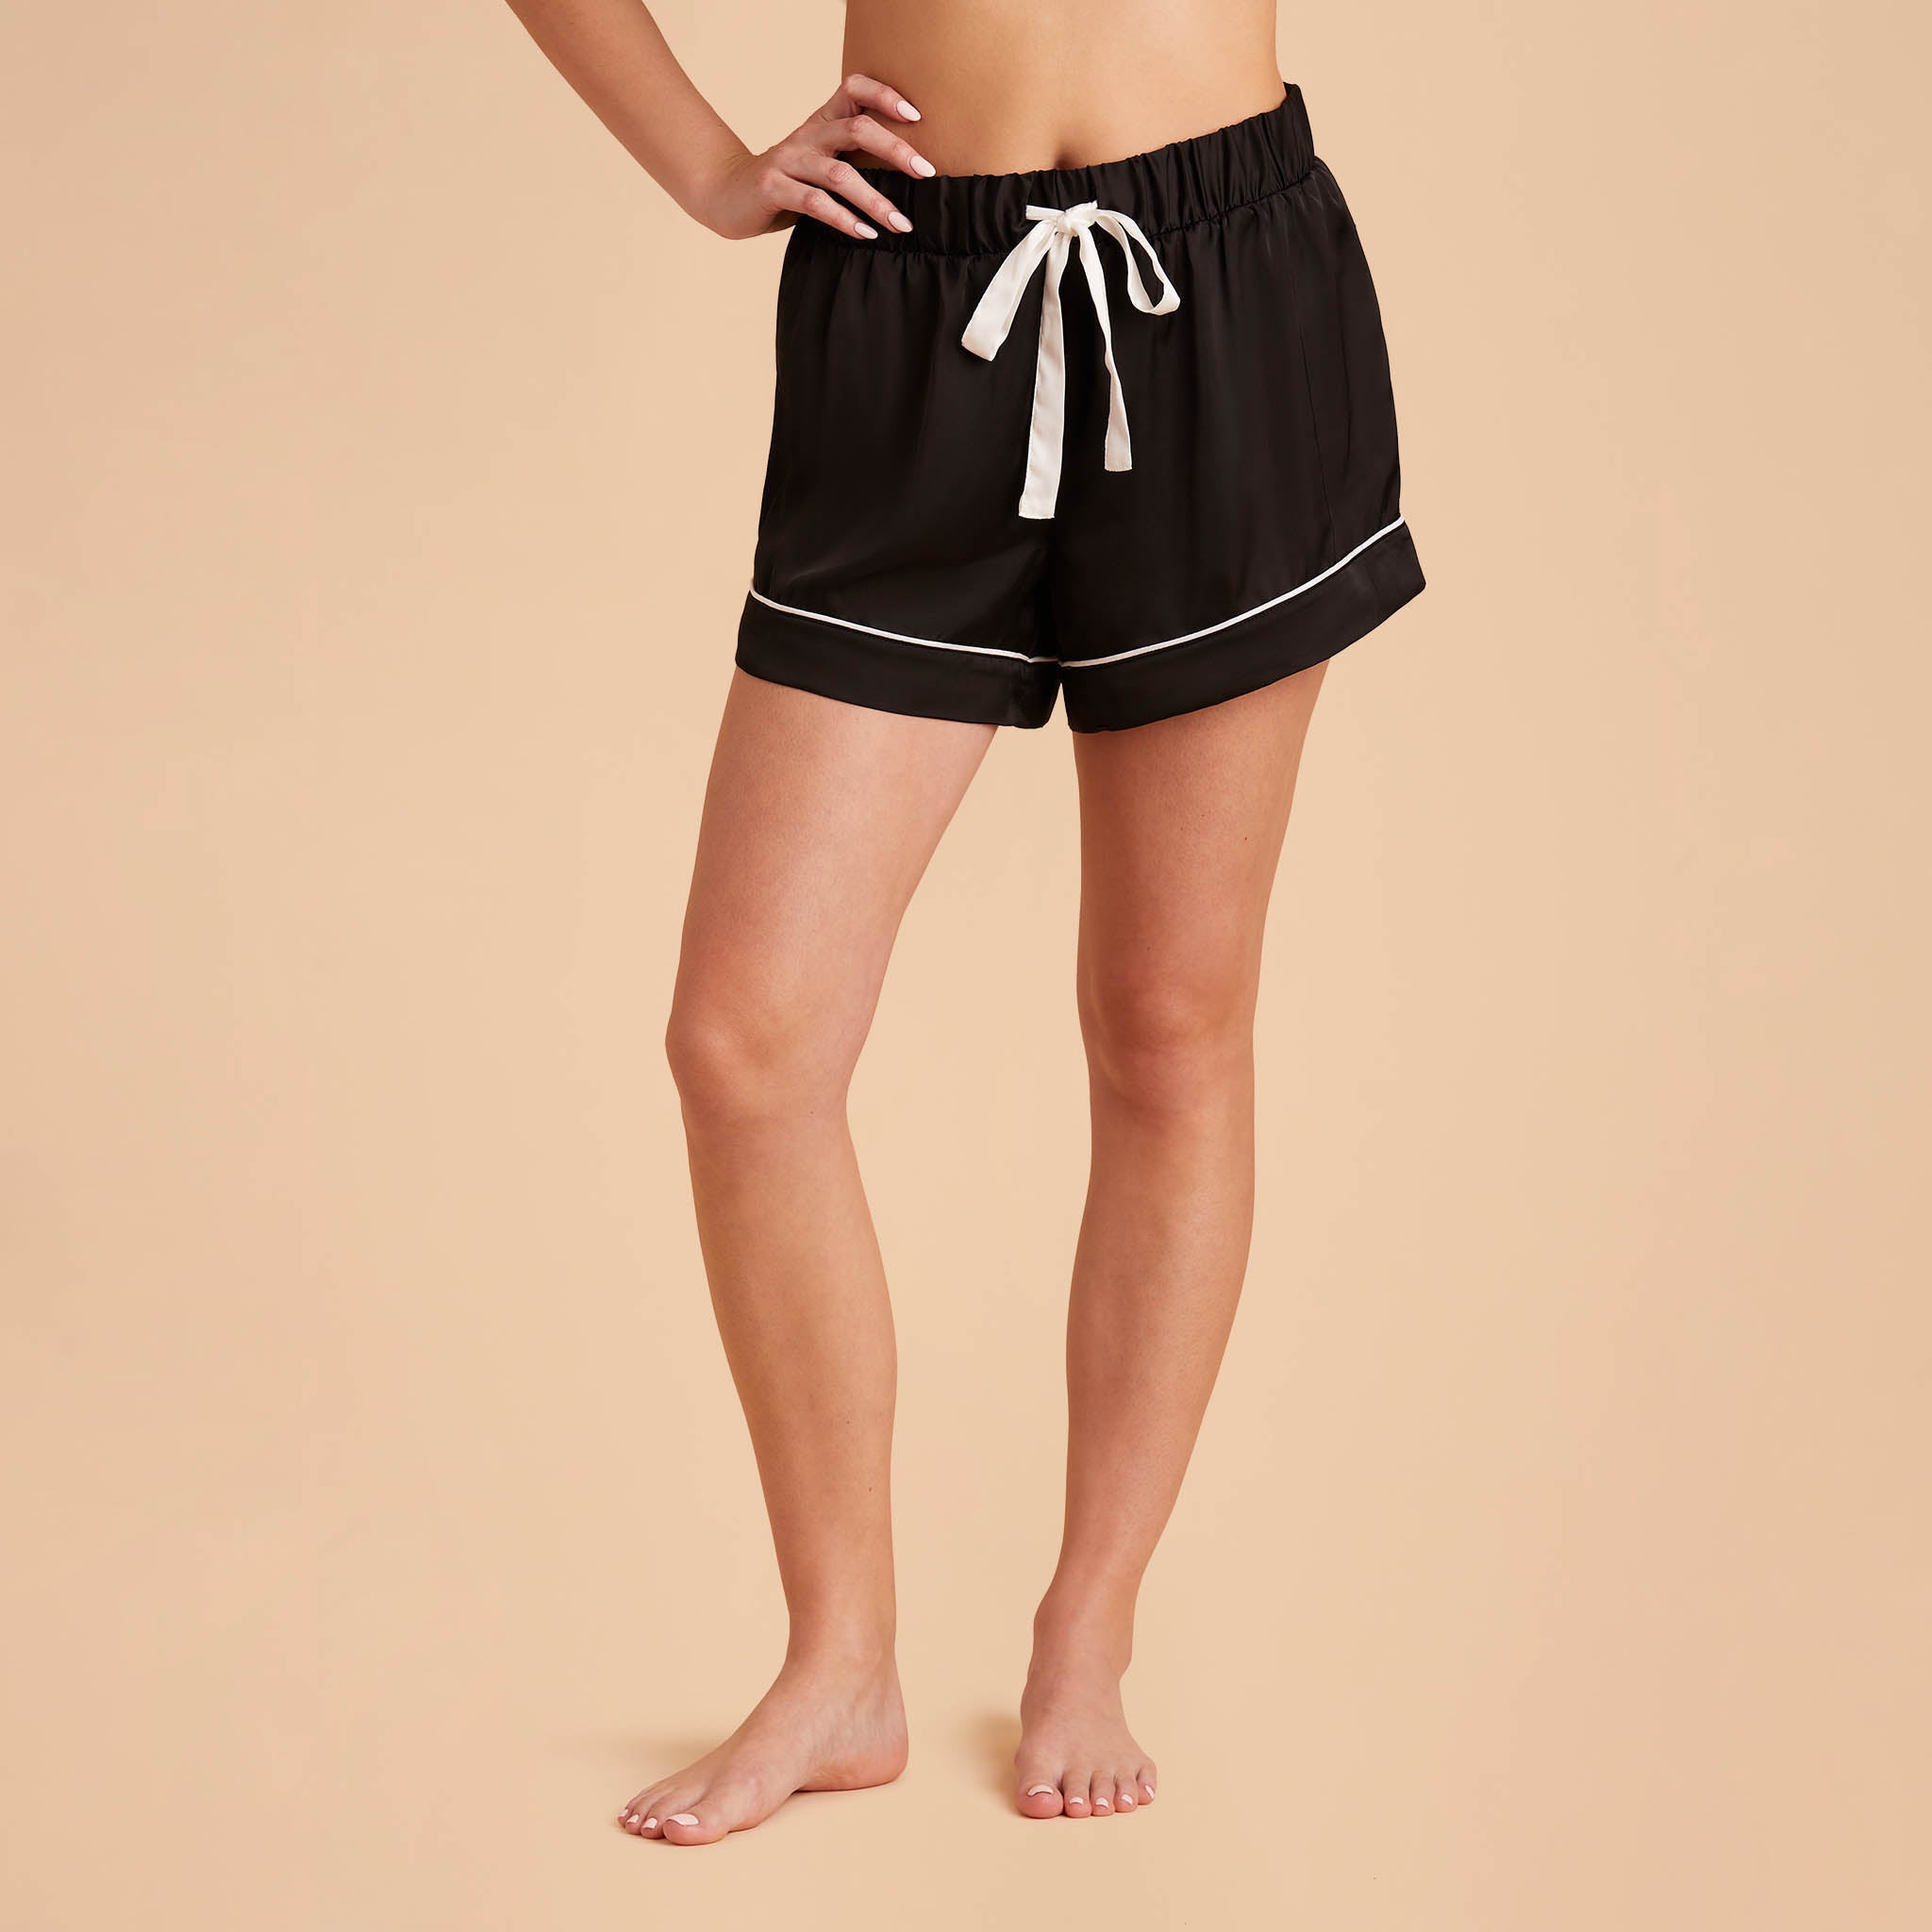 Jonny Satin Shorts Bridesmaid Pajamas With White Piping in Black, front view